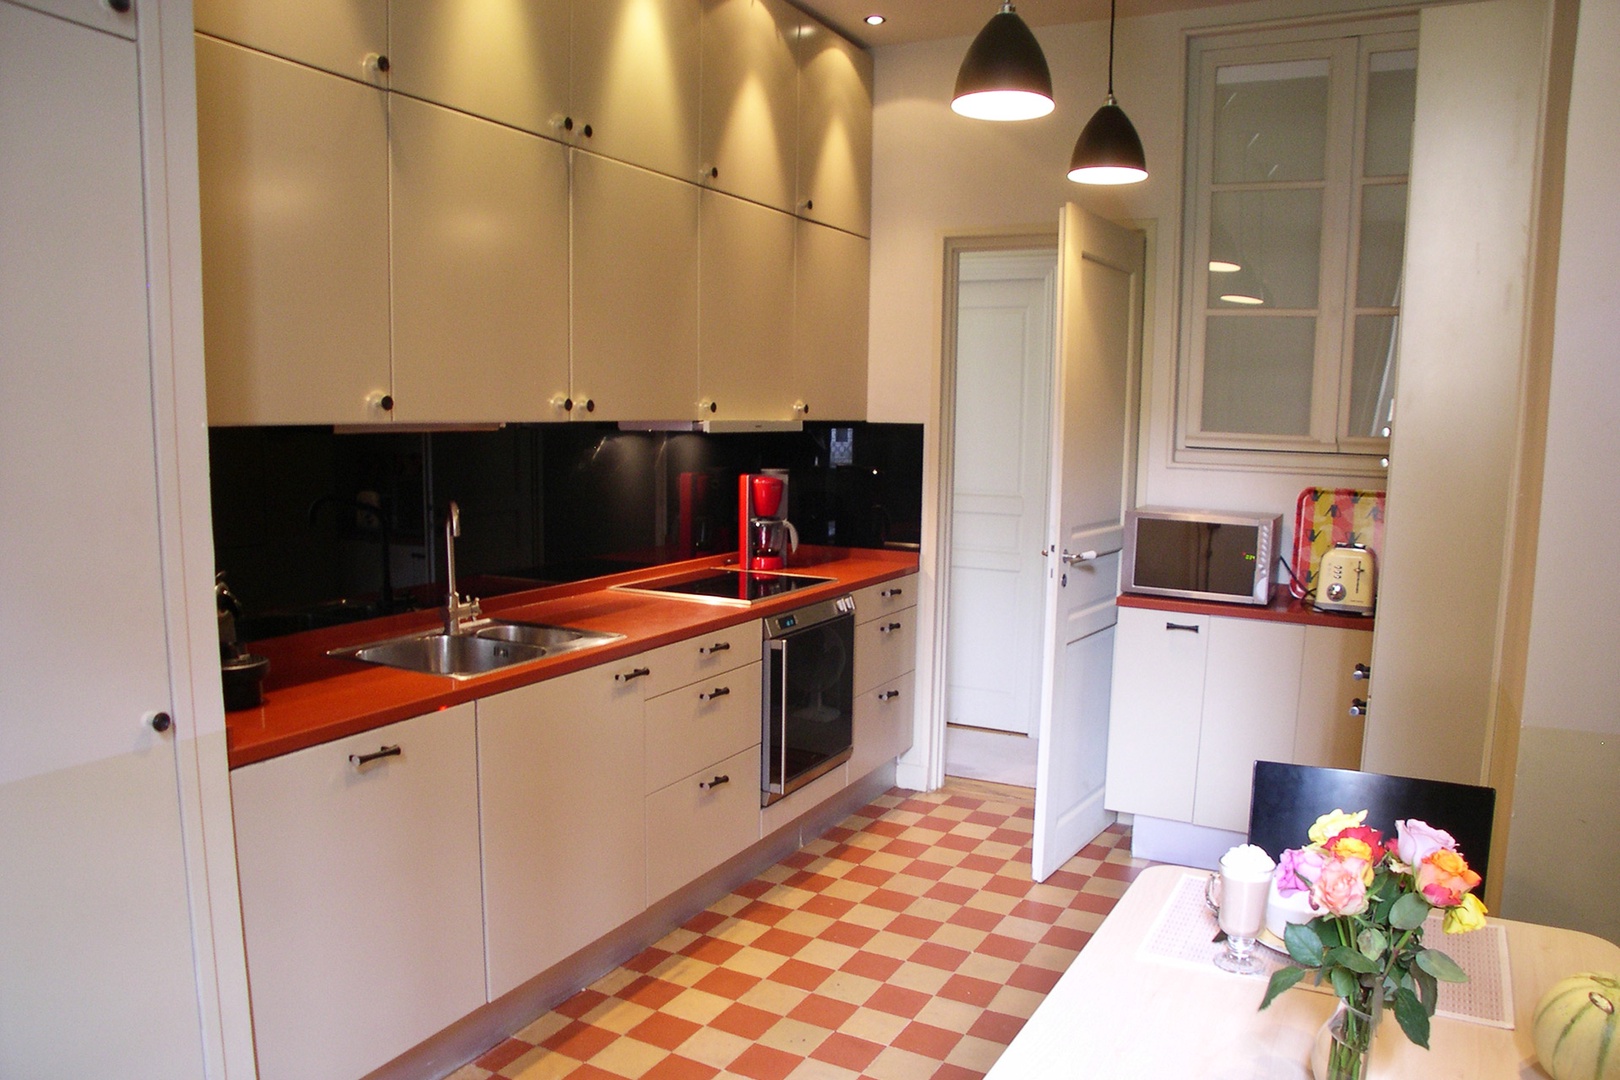 Enjoy cooking in this elegant kitchen with stylish checkerboard tiles.